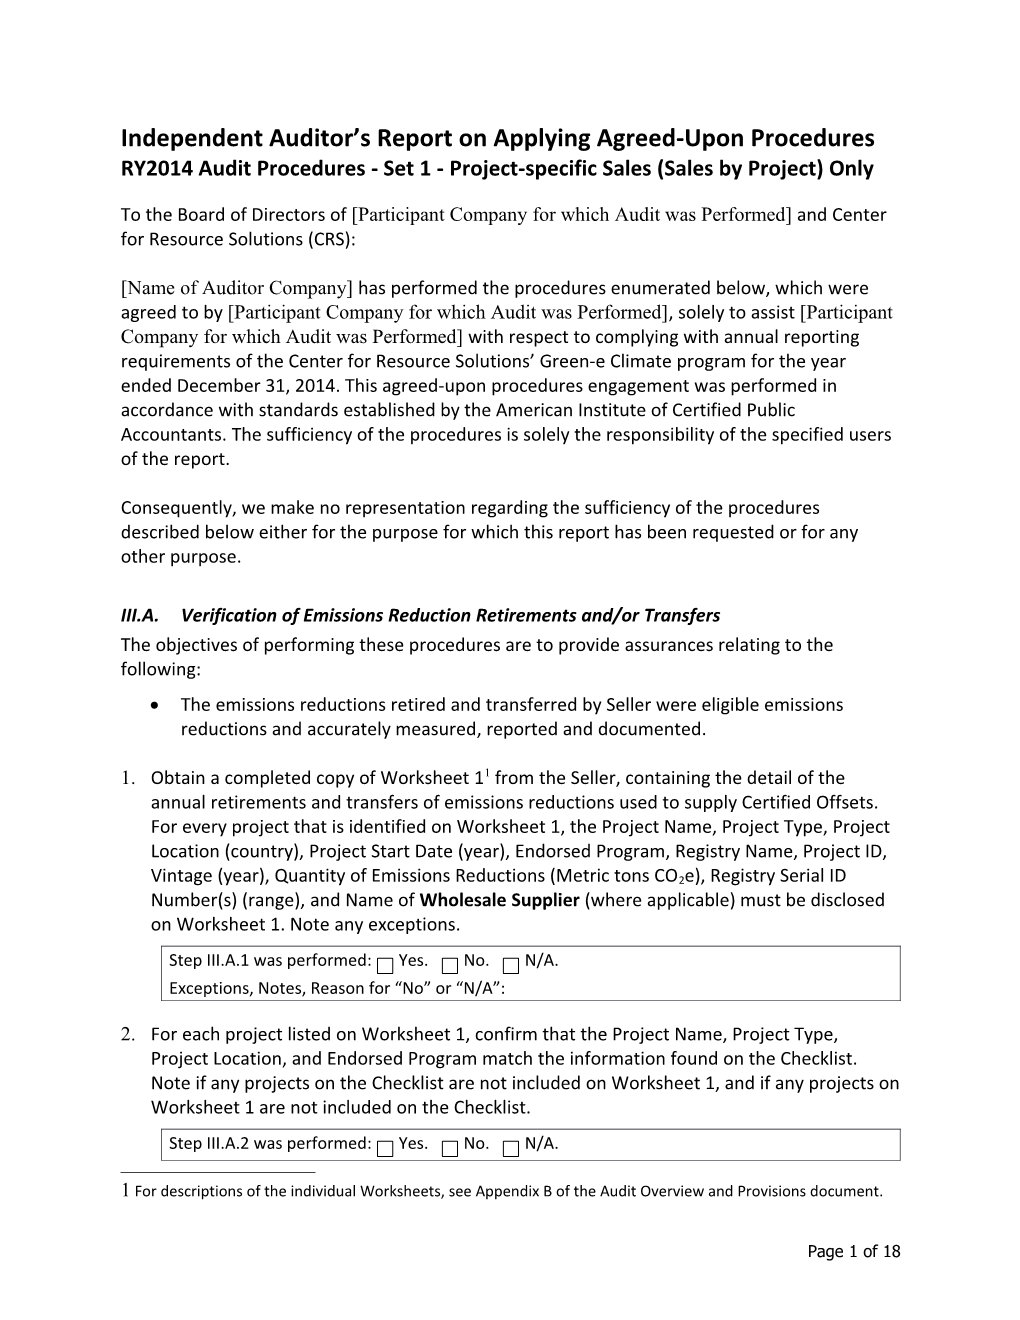 Independent Auditor S Report on Applying Agreed-Upon Procedures